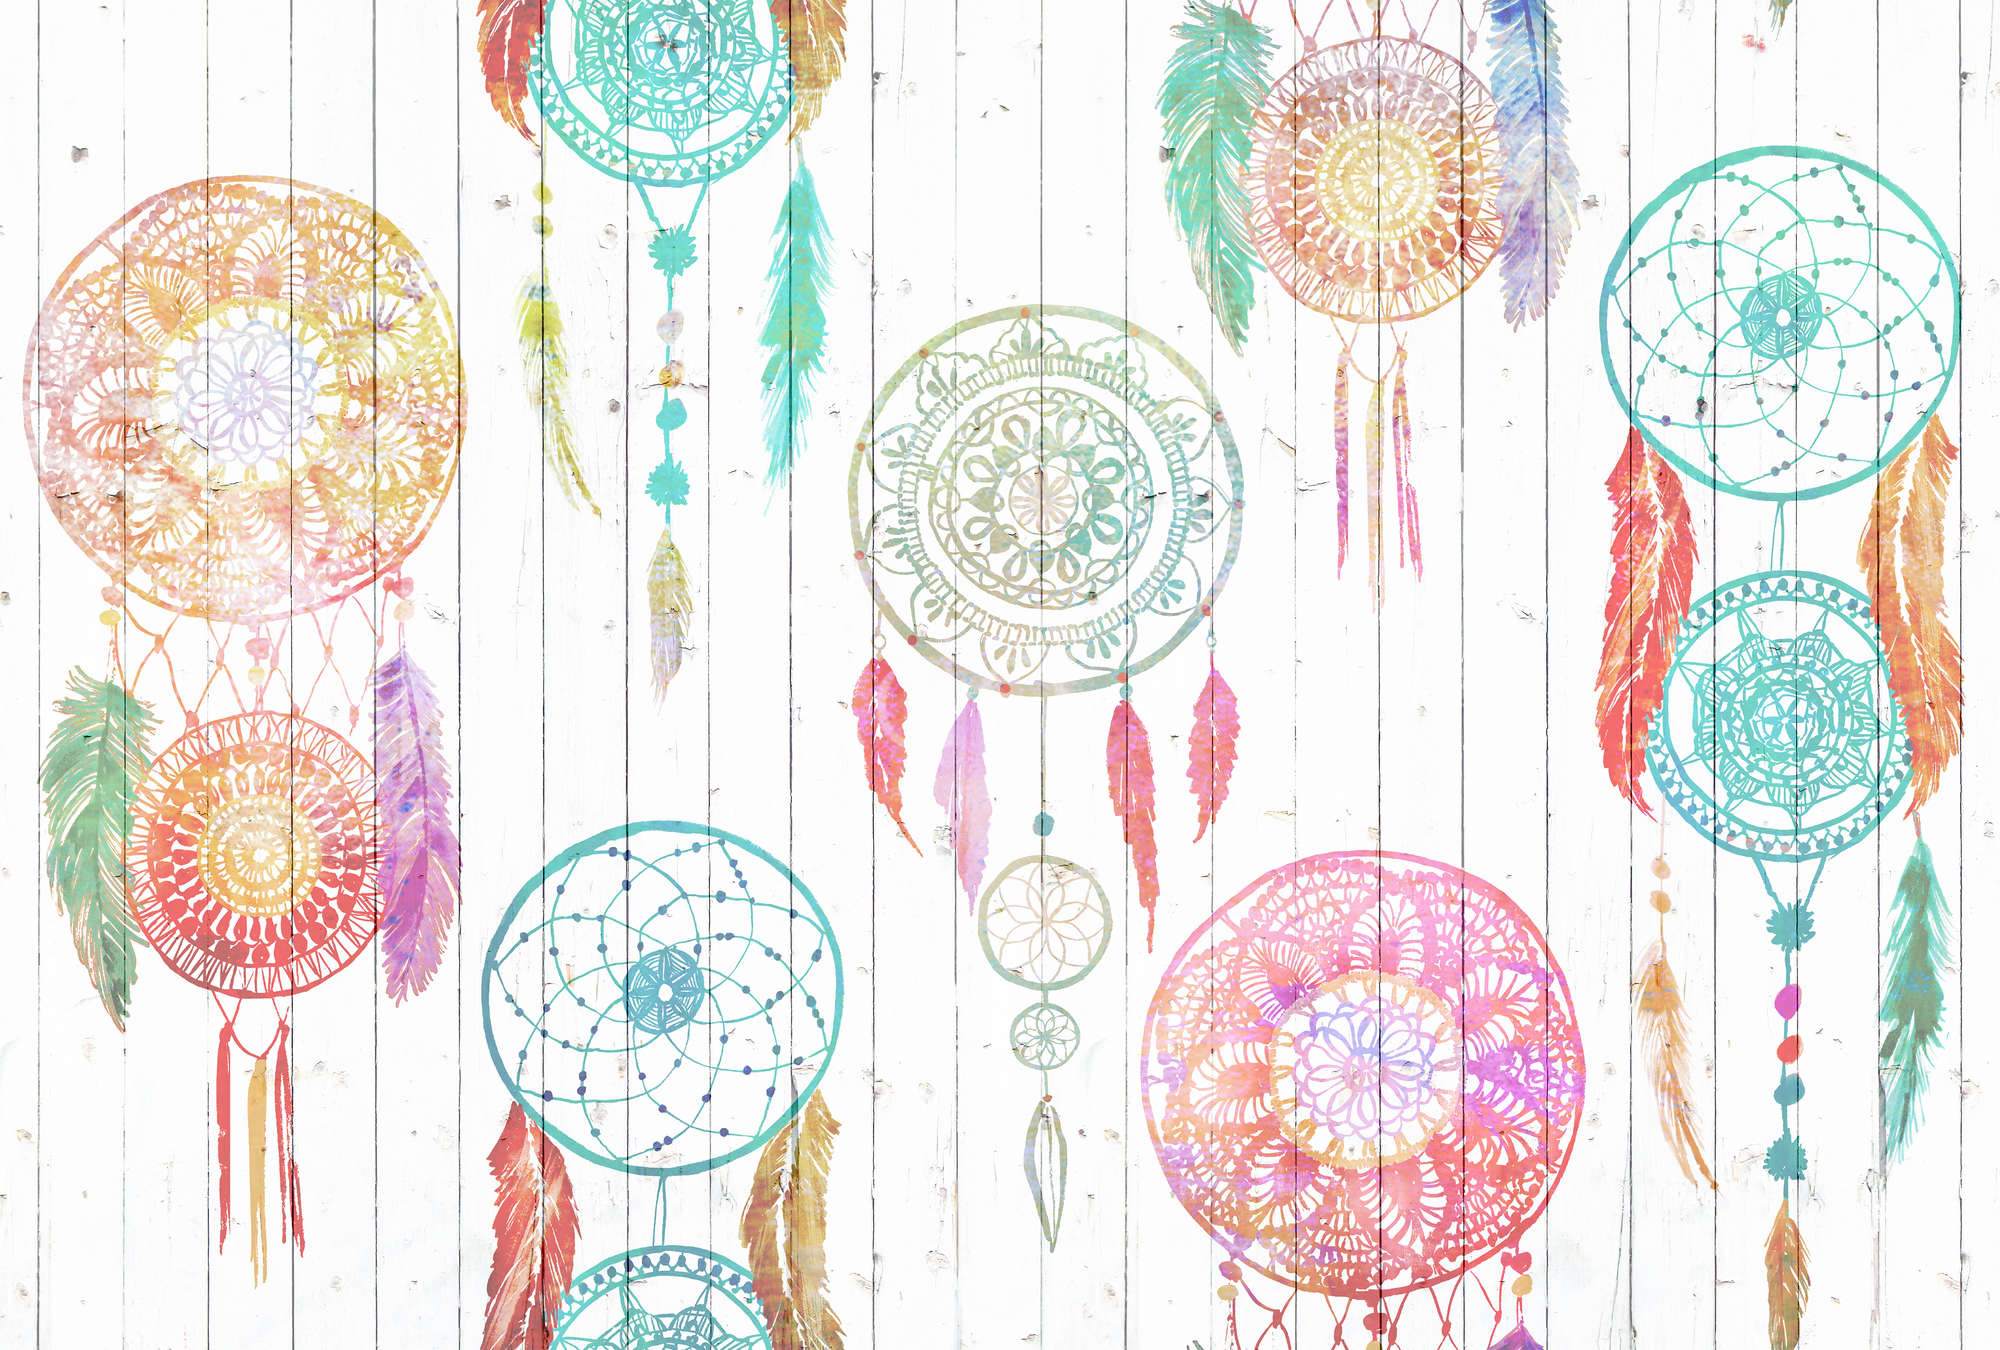             Boho mural with dream catcher & wood look - colourful, white, red
        